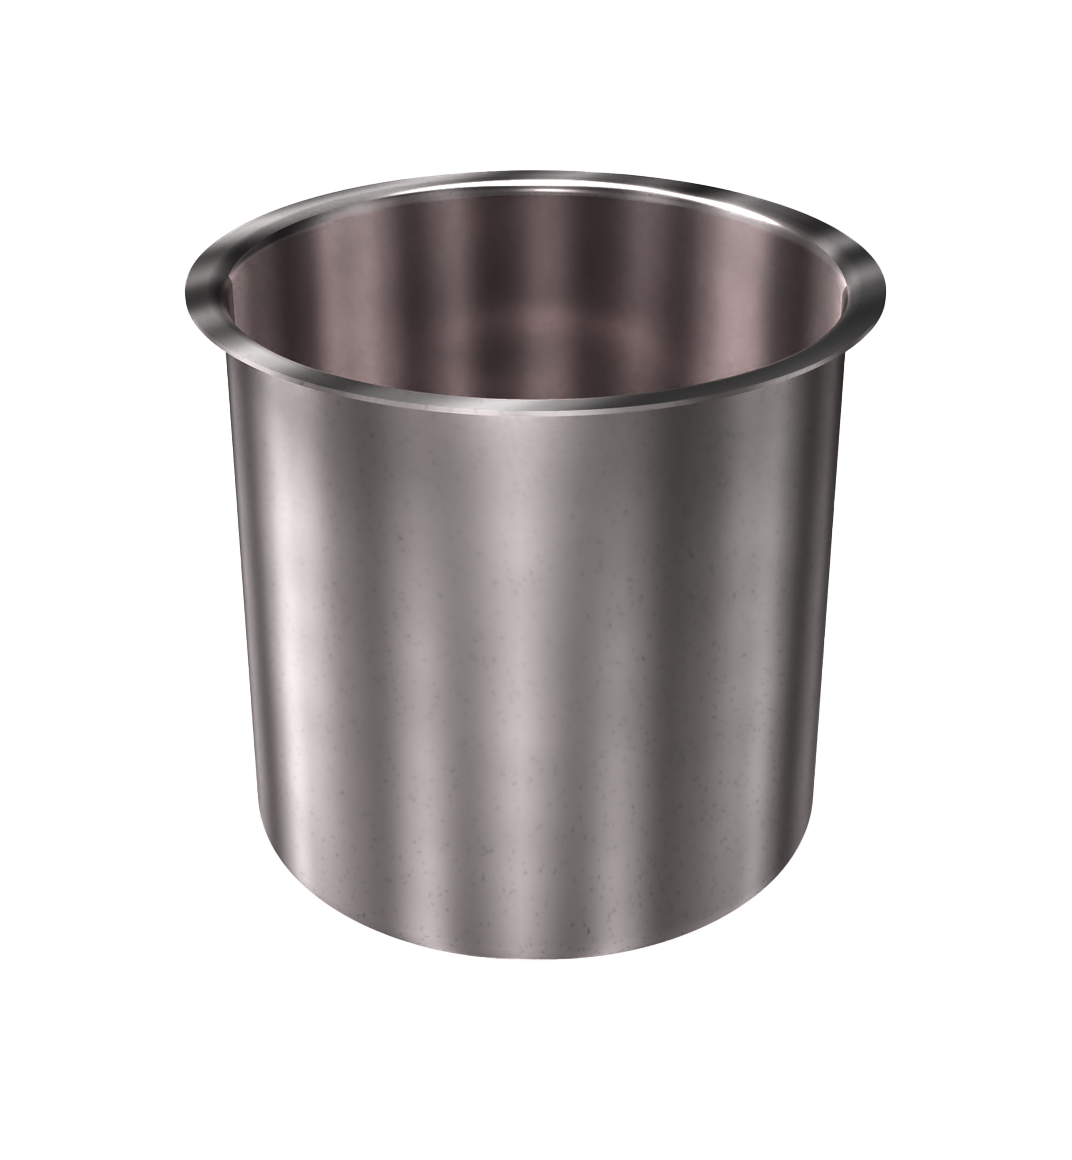 304 Stainless Steel Cup 0.89 Gallon 8.85" ID 9.13" OAH